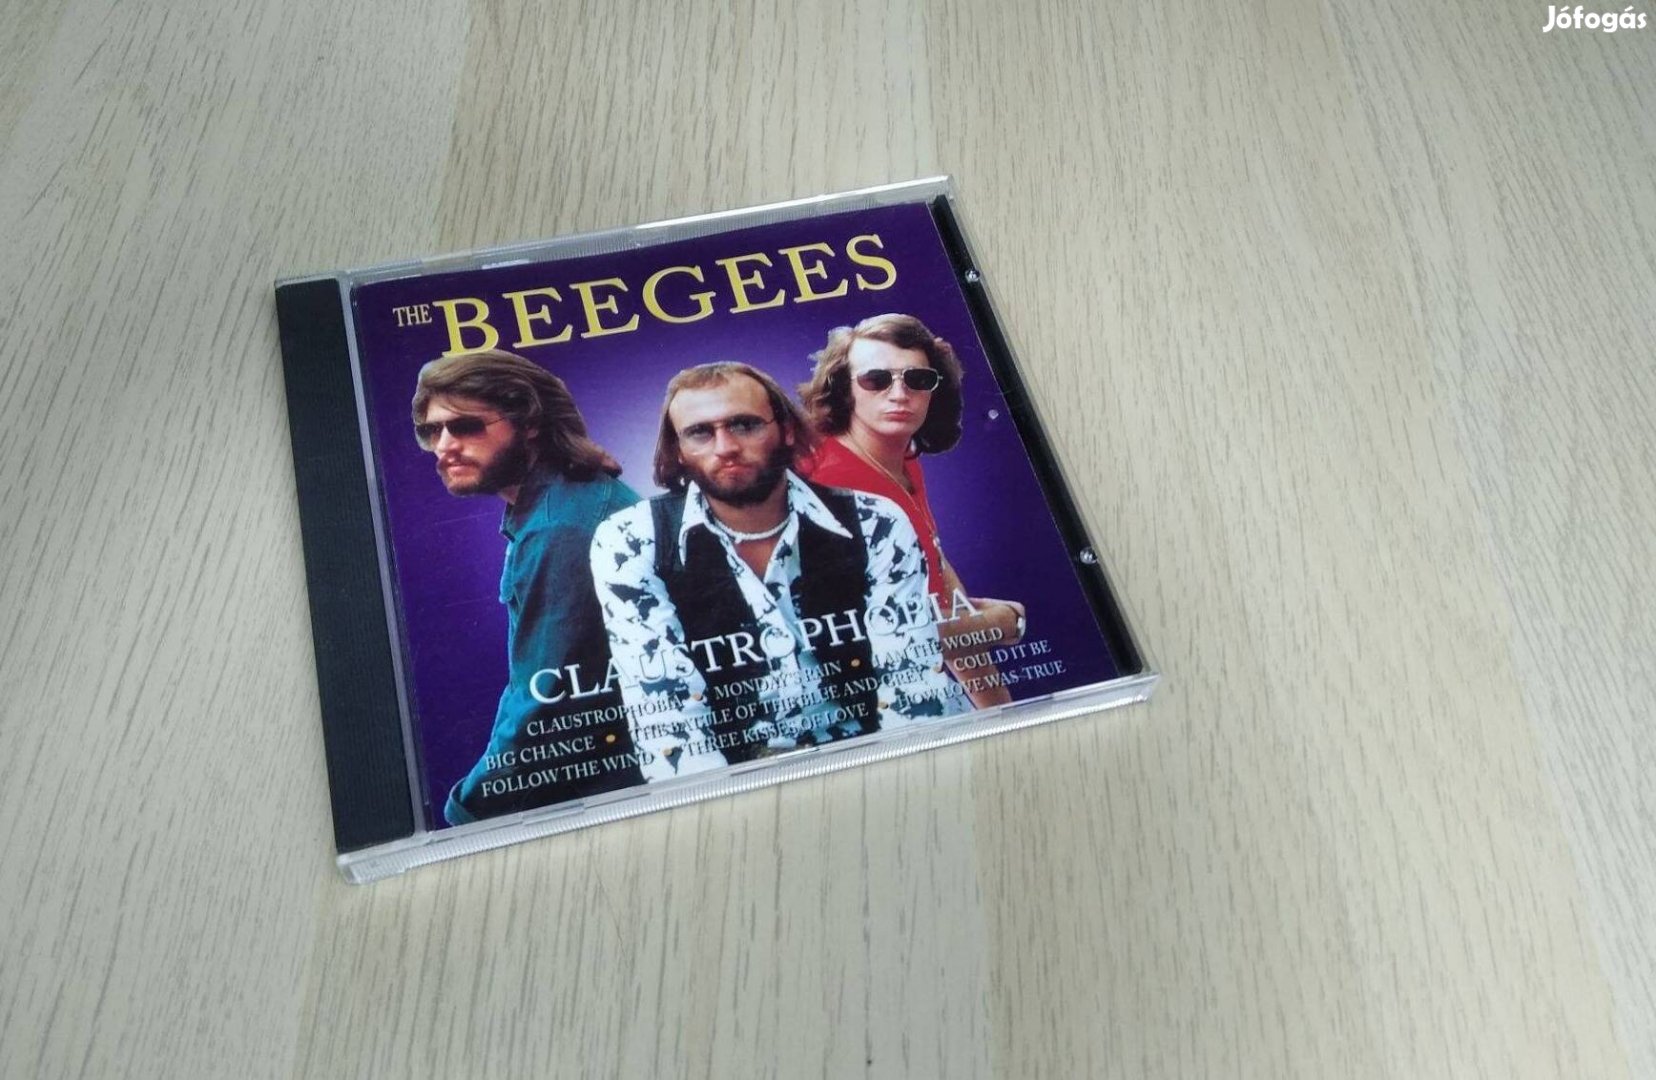 The Beegees - Claustrophobia / CD